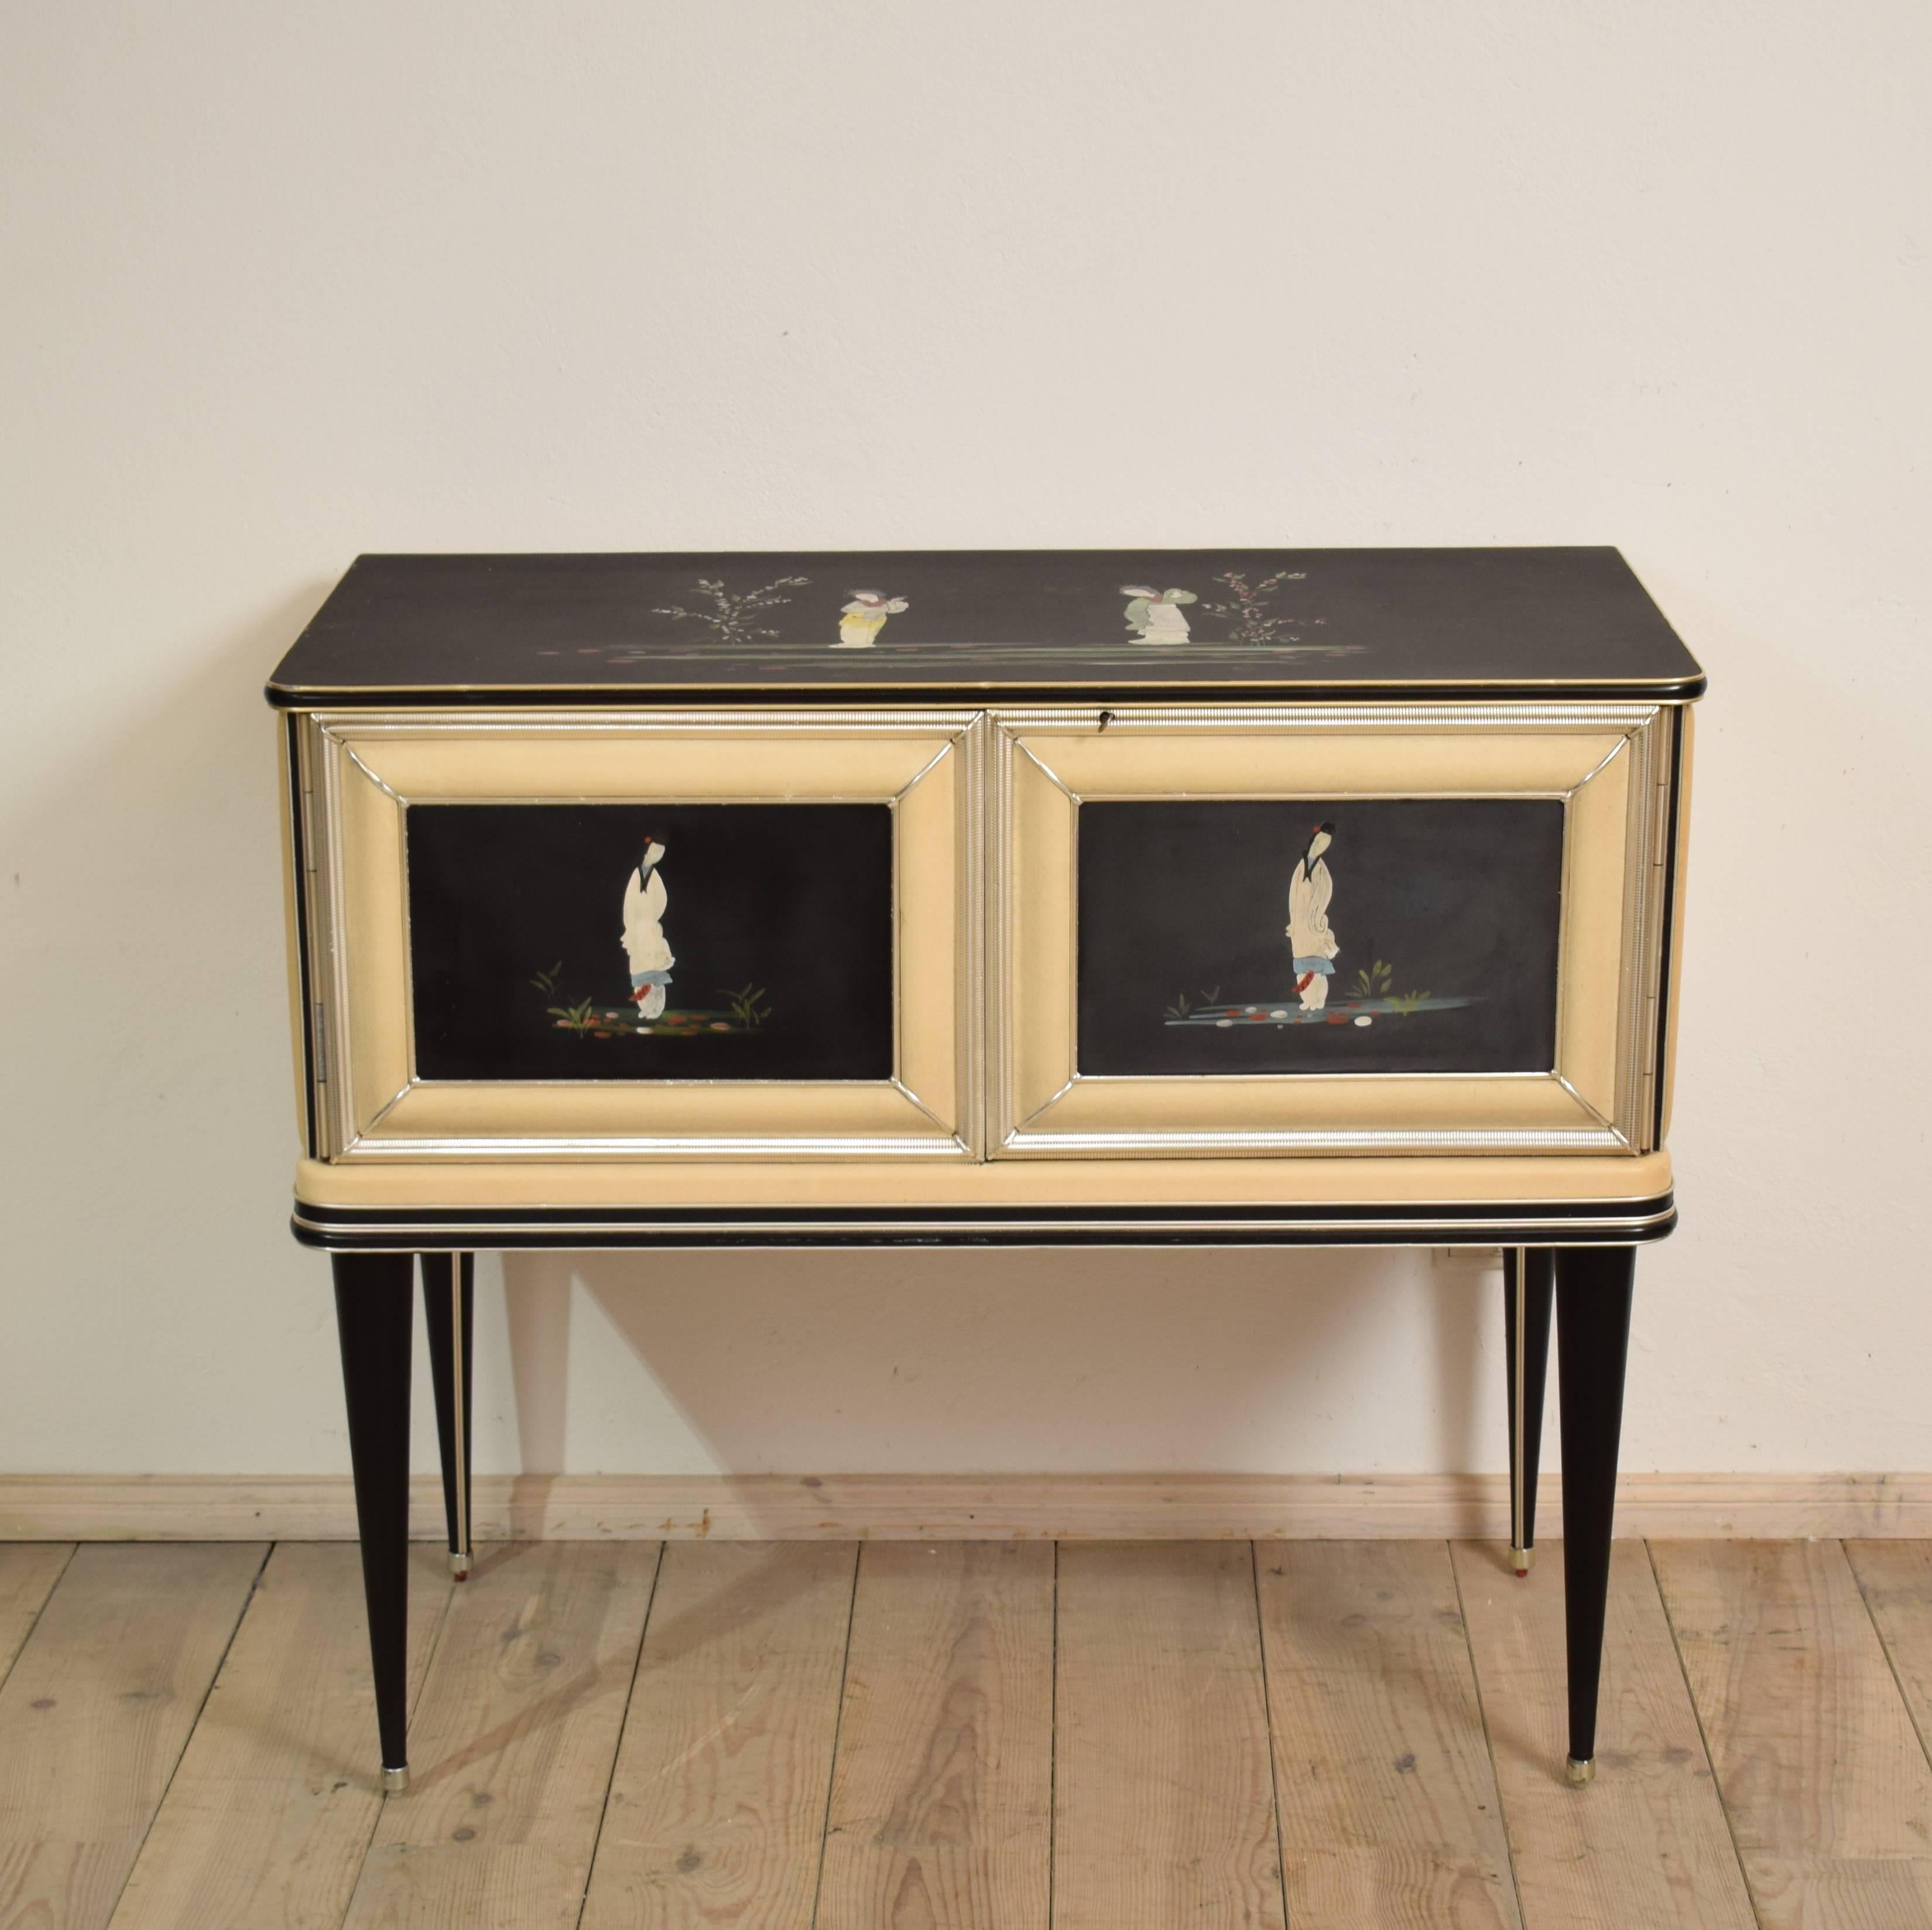 This Italian midcentury chinoiserie sideboard by designer Umberto Mascagni. The anodized aluminum frame is covered in 